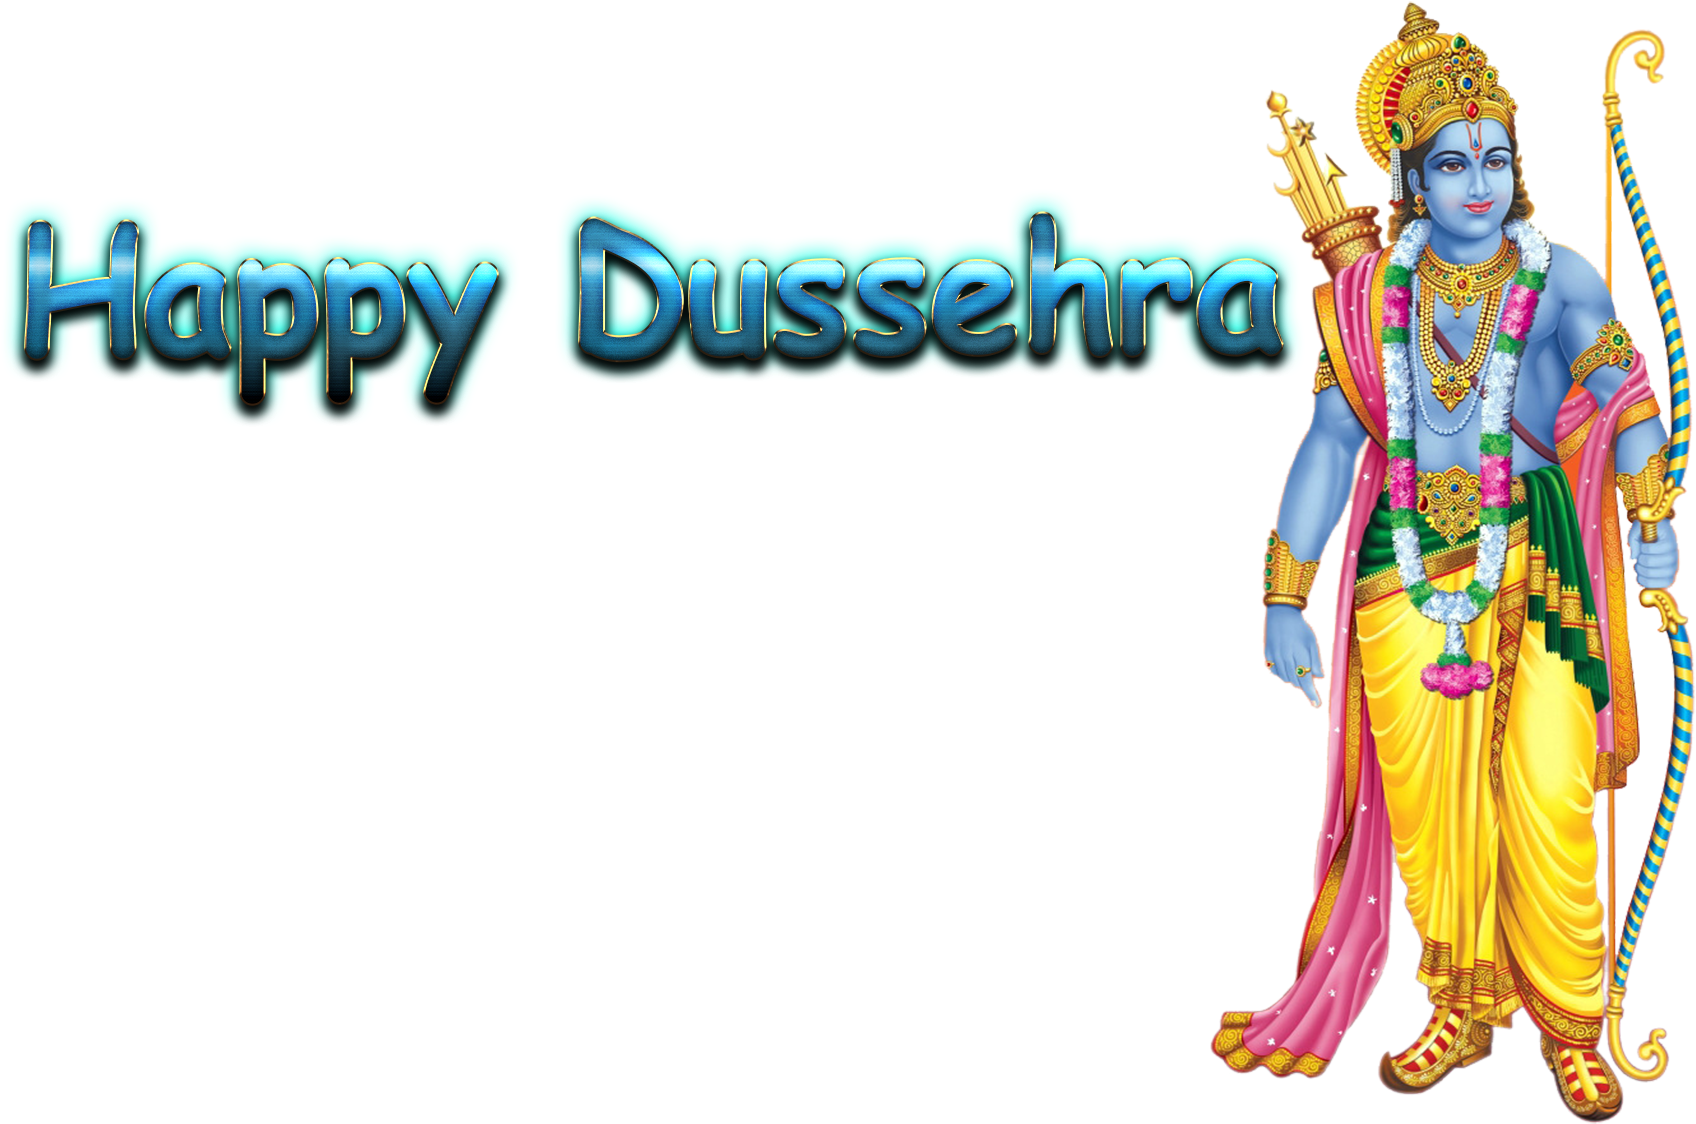 Happy Dussehra Lord Rama Greeting PNG